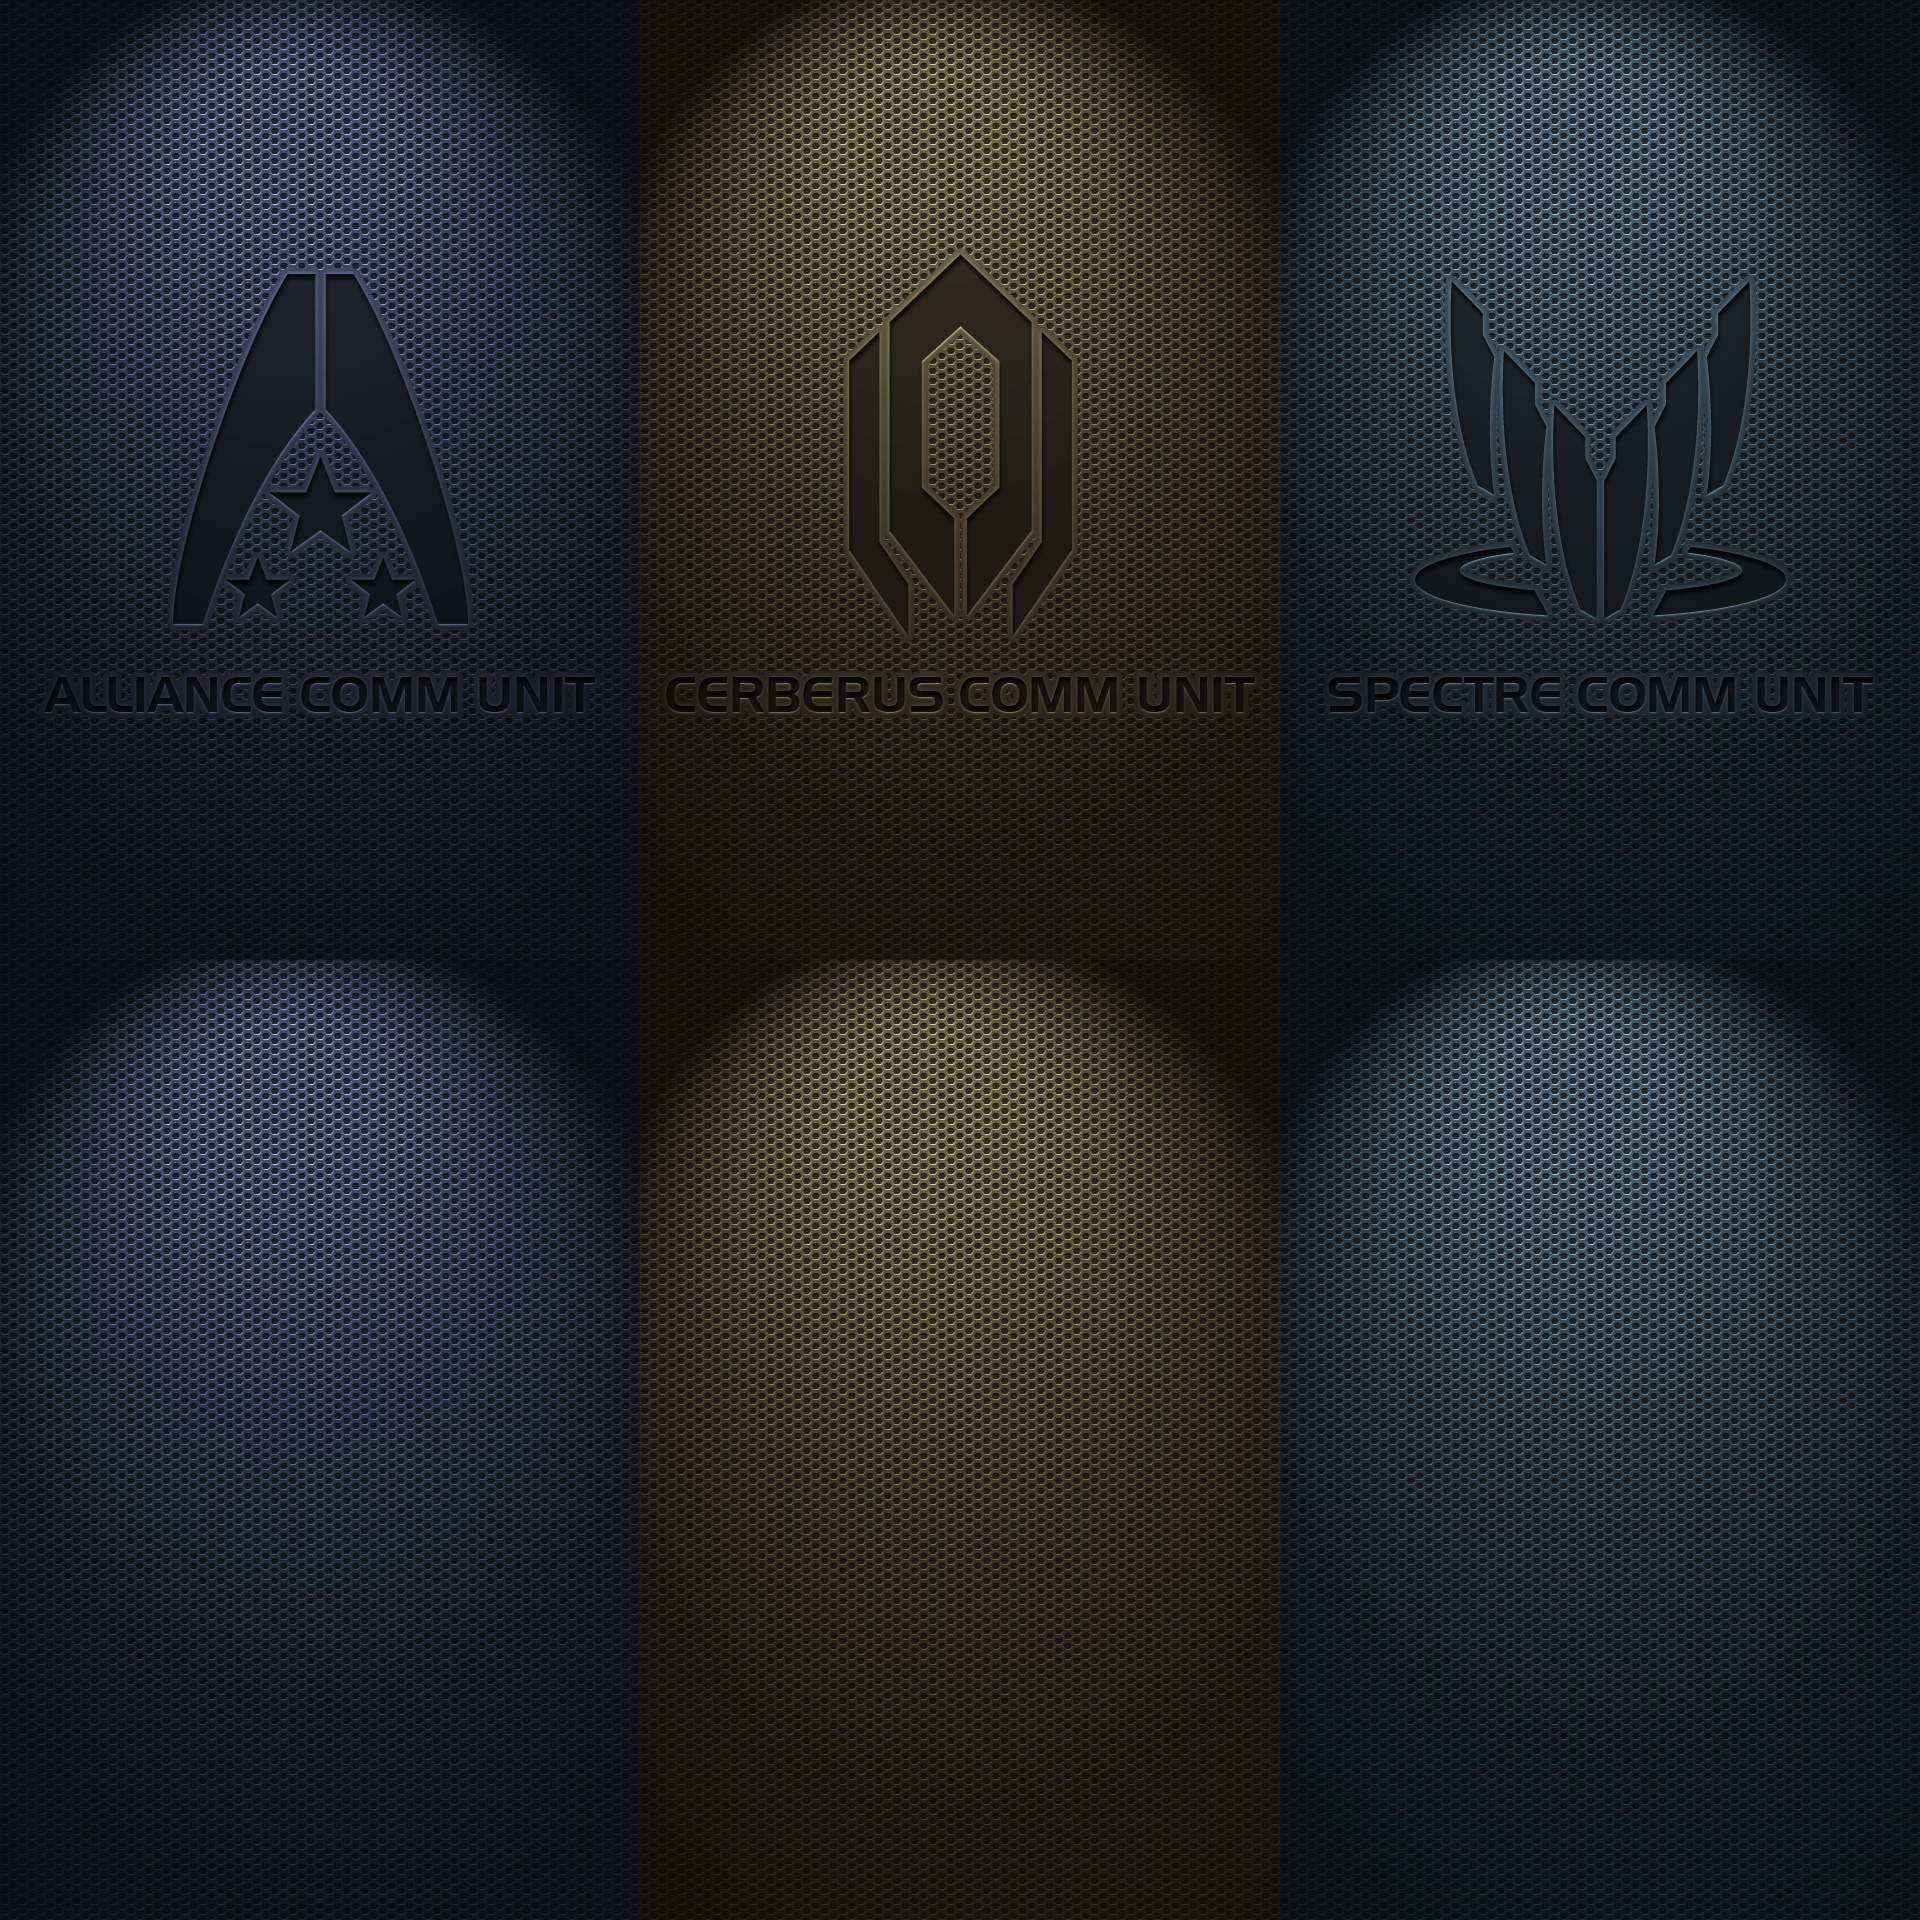 Mass Effect Comms iPhone Wallpapers Pack by InterestingJohn.